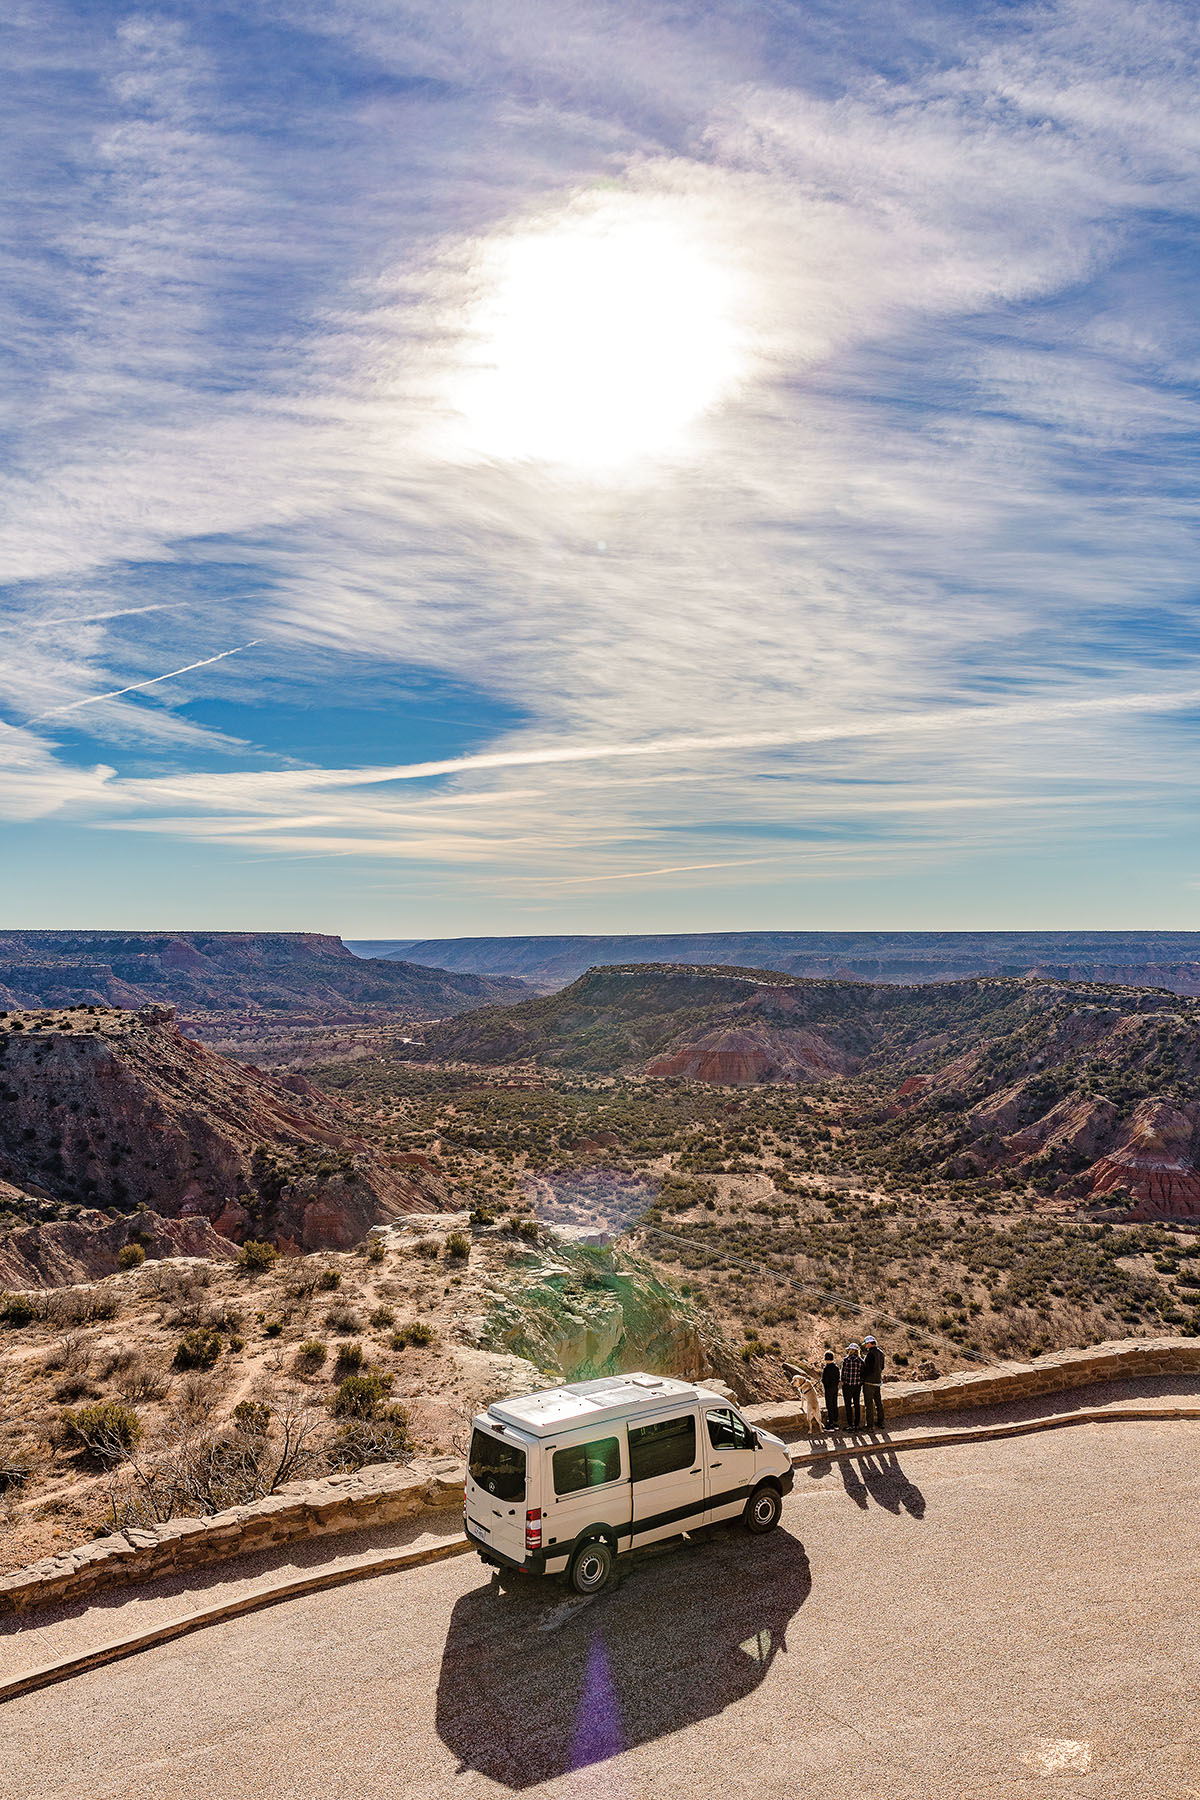 A white camper van parked by the side of the road overlooking a vast canyon under blue sky